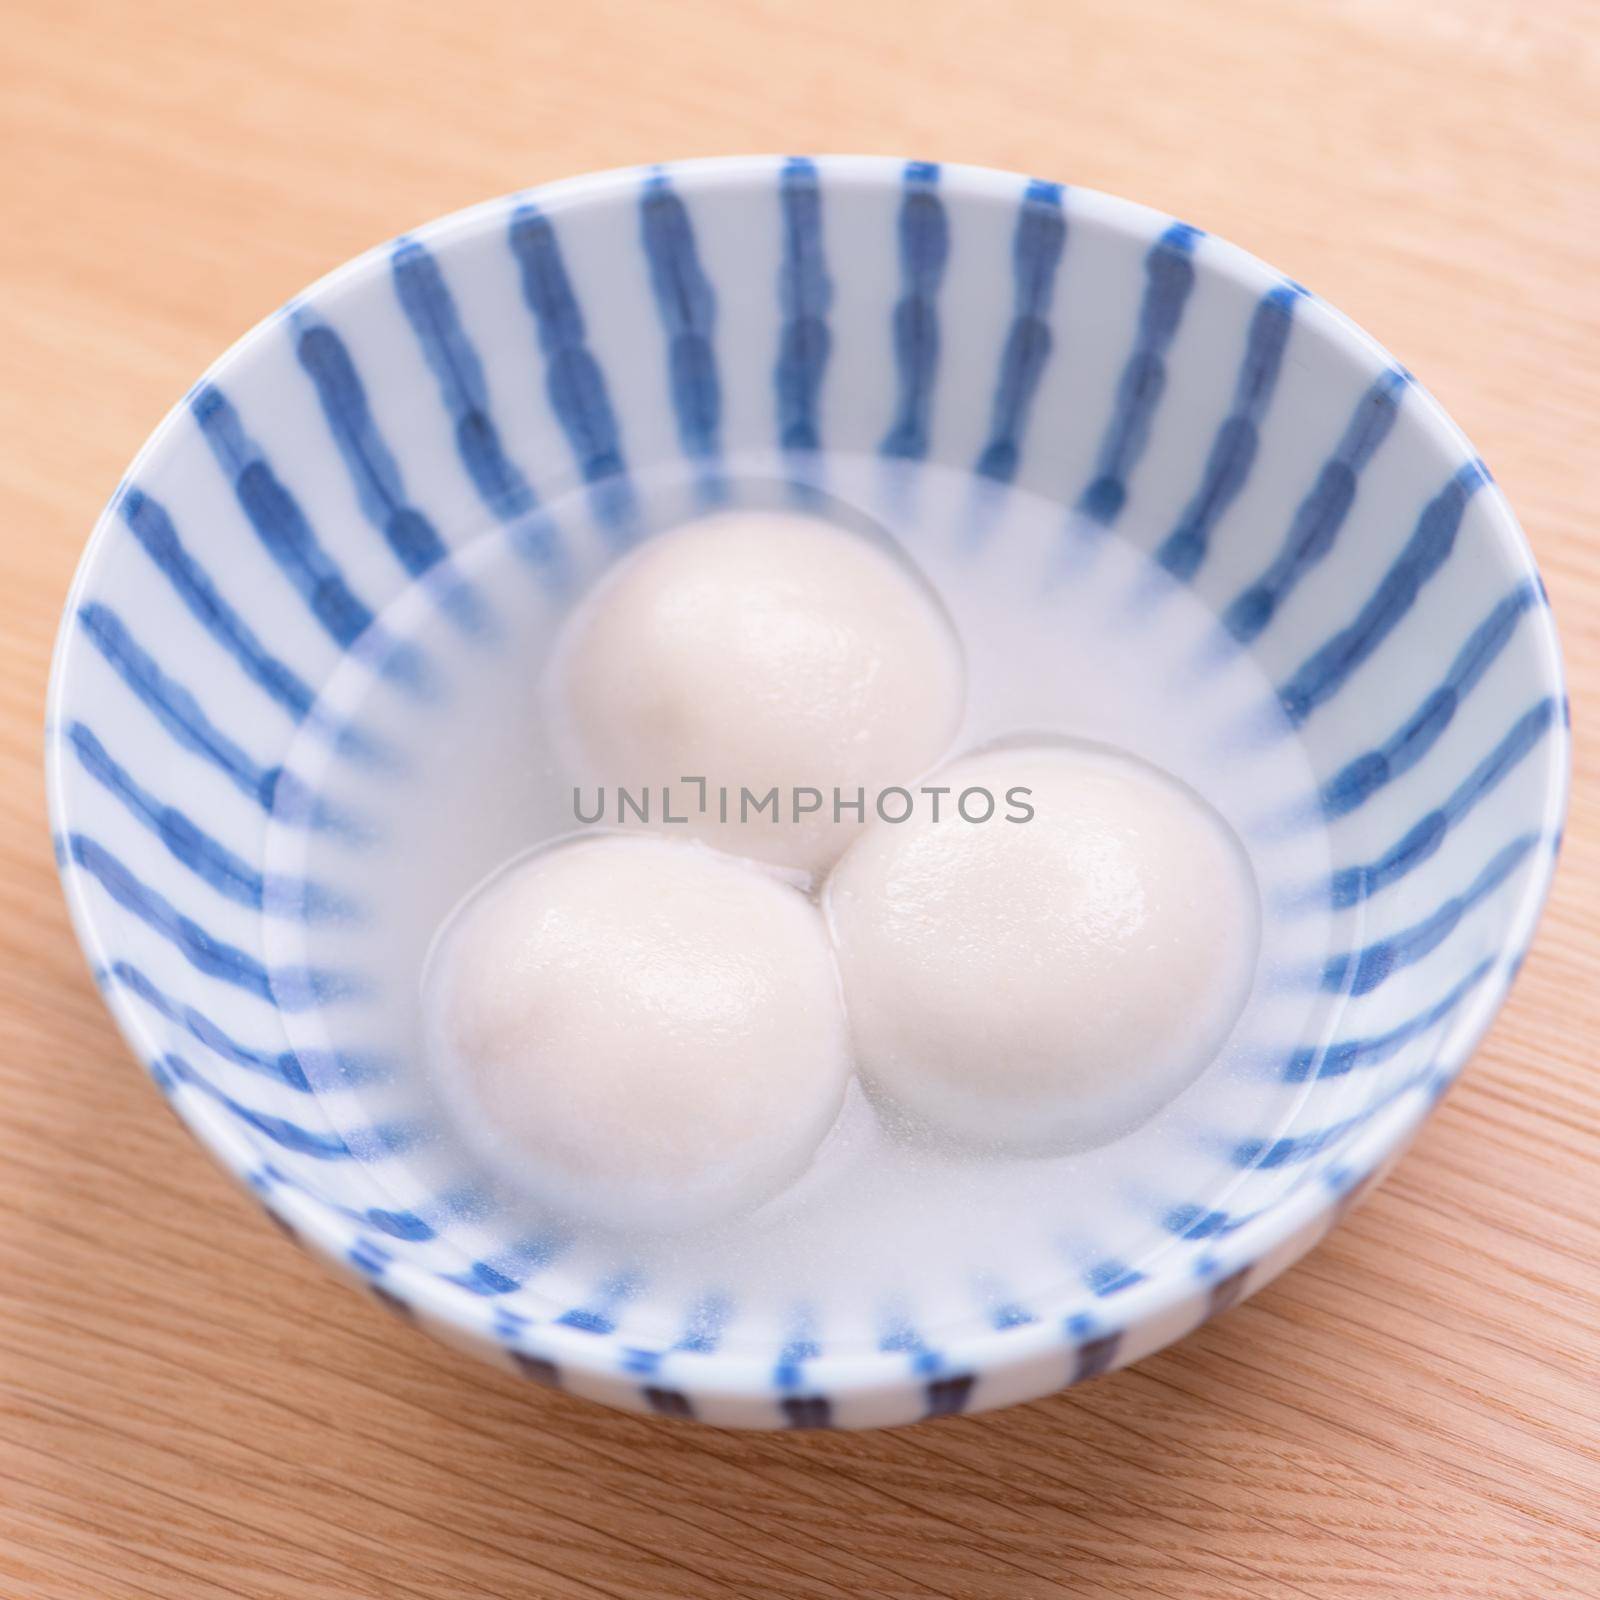 Tang yuan, tangyuan, yuanxiao in a small bowl. Delicious asian traditional festive food rice dumpling balls with stuffed fillings for Chinese Lantern Festival, close up.